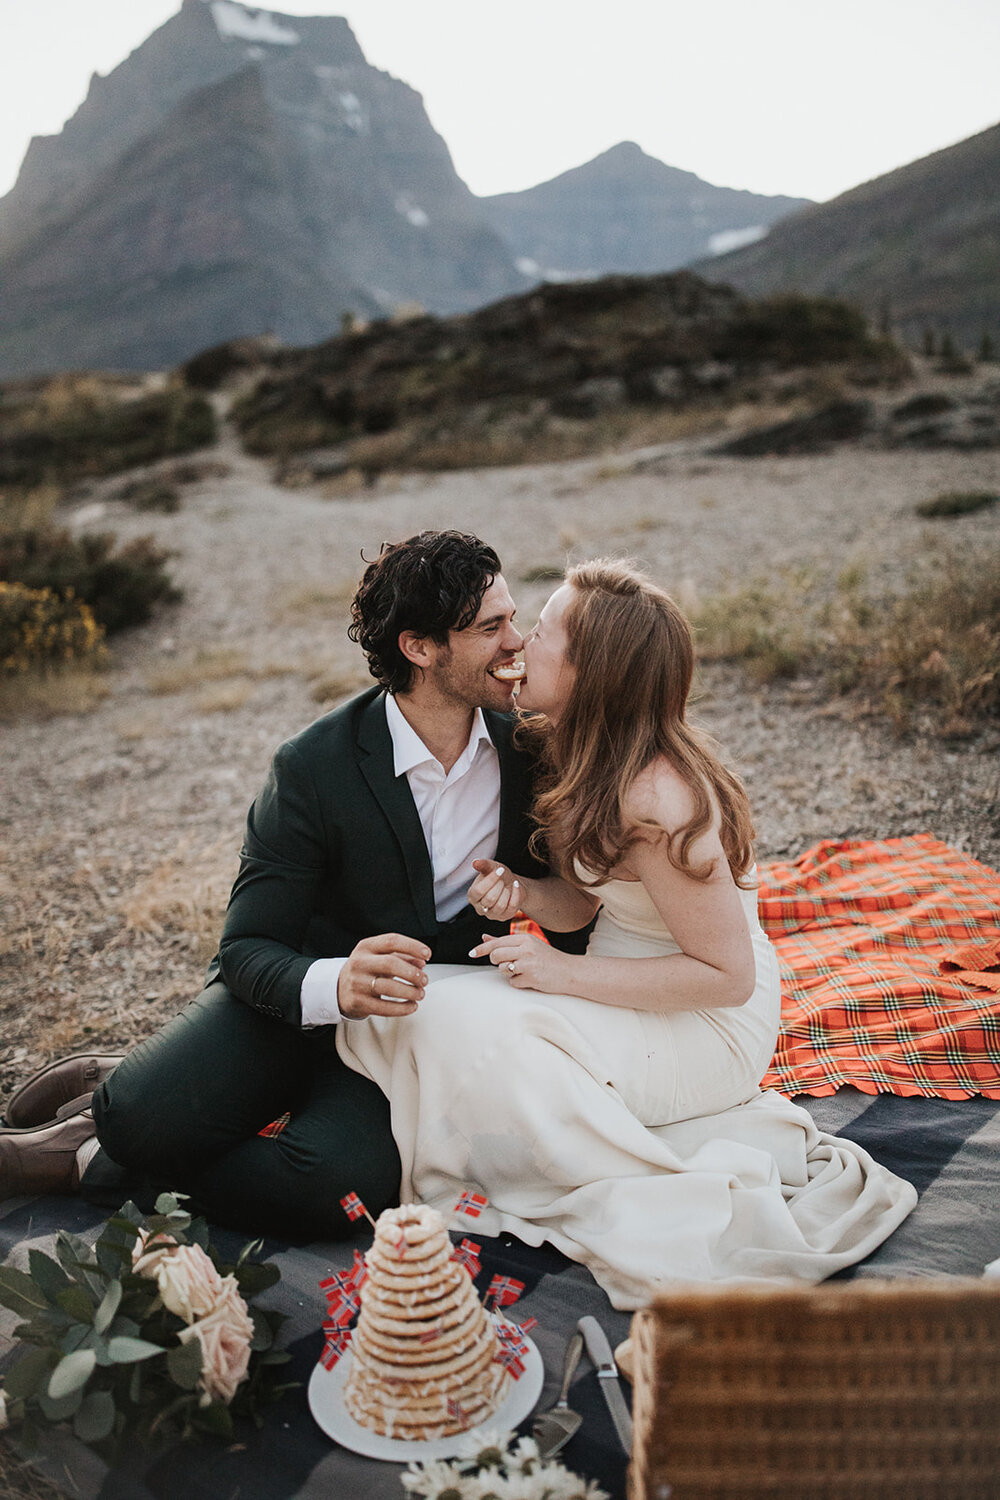 Bride and groom playfully bite into a piece of their food during their Montana elopement picnic